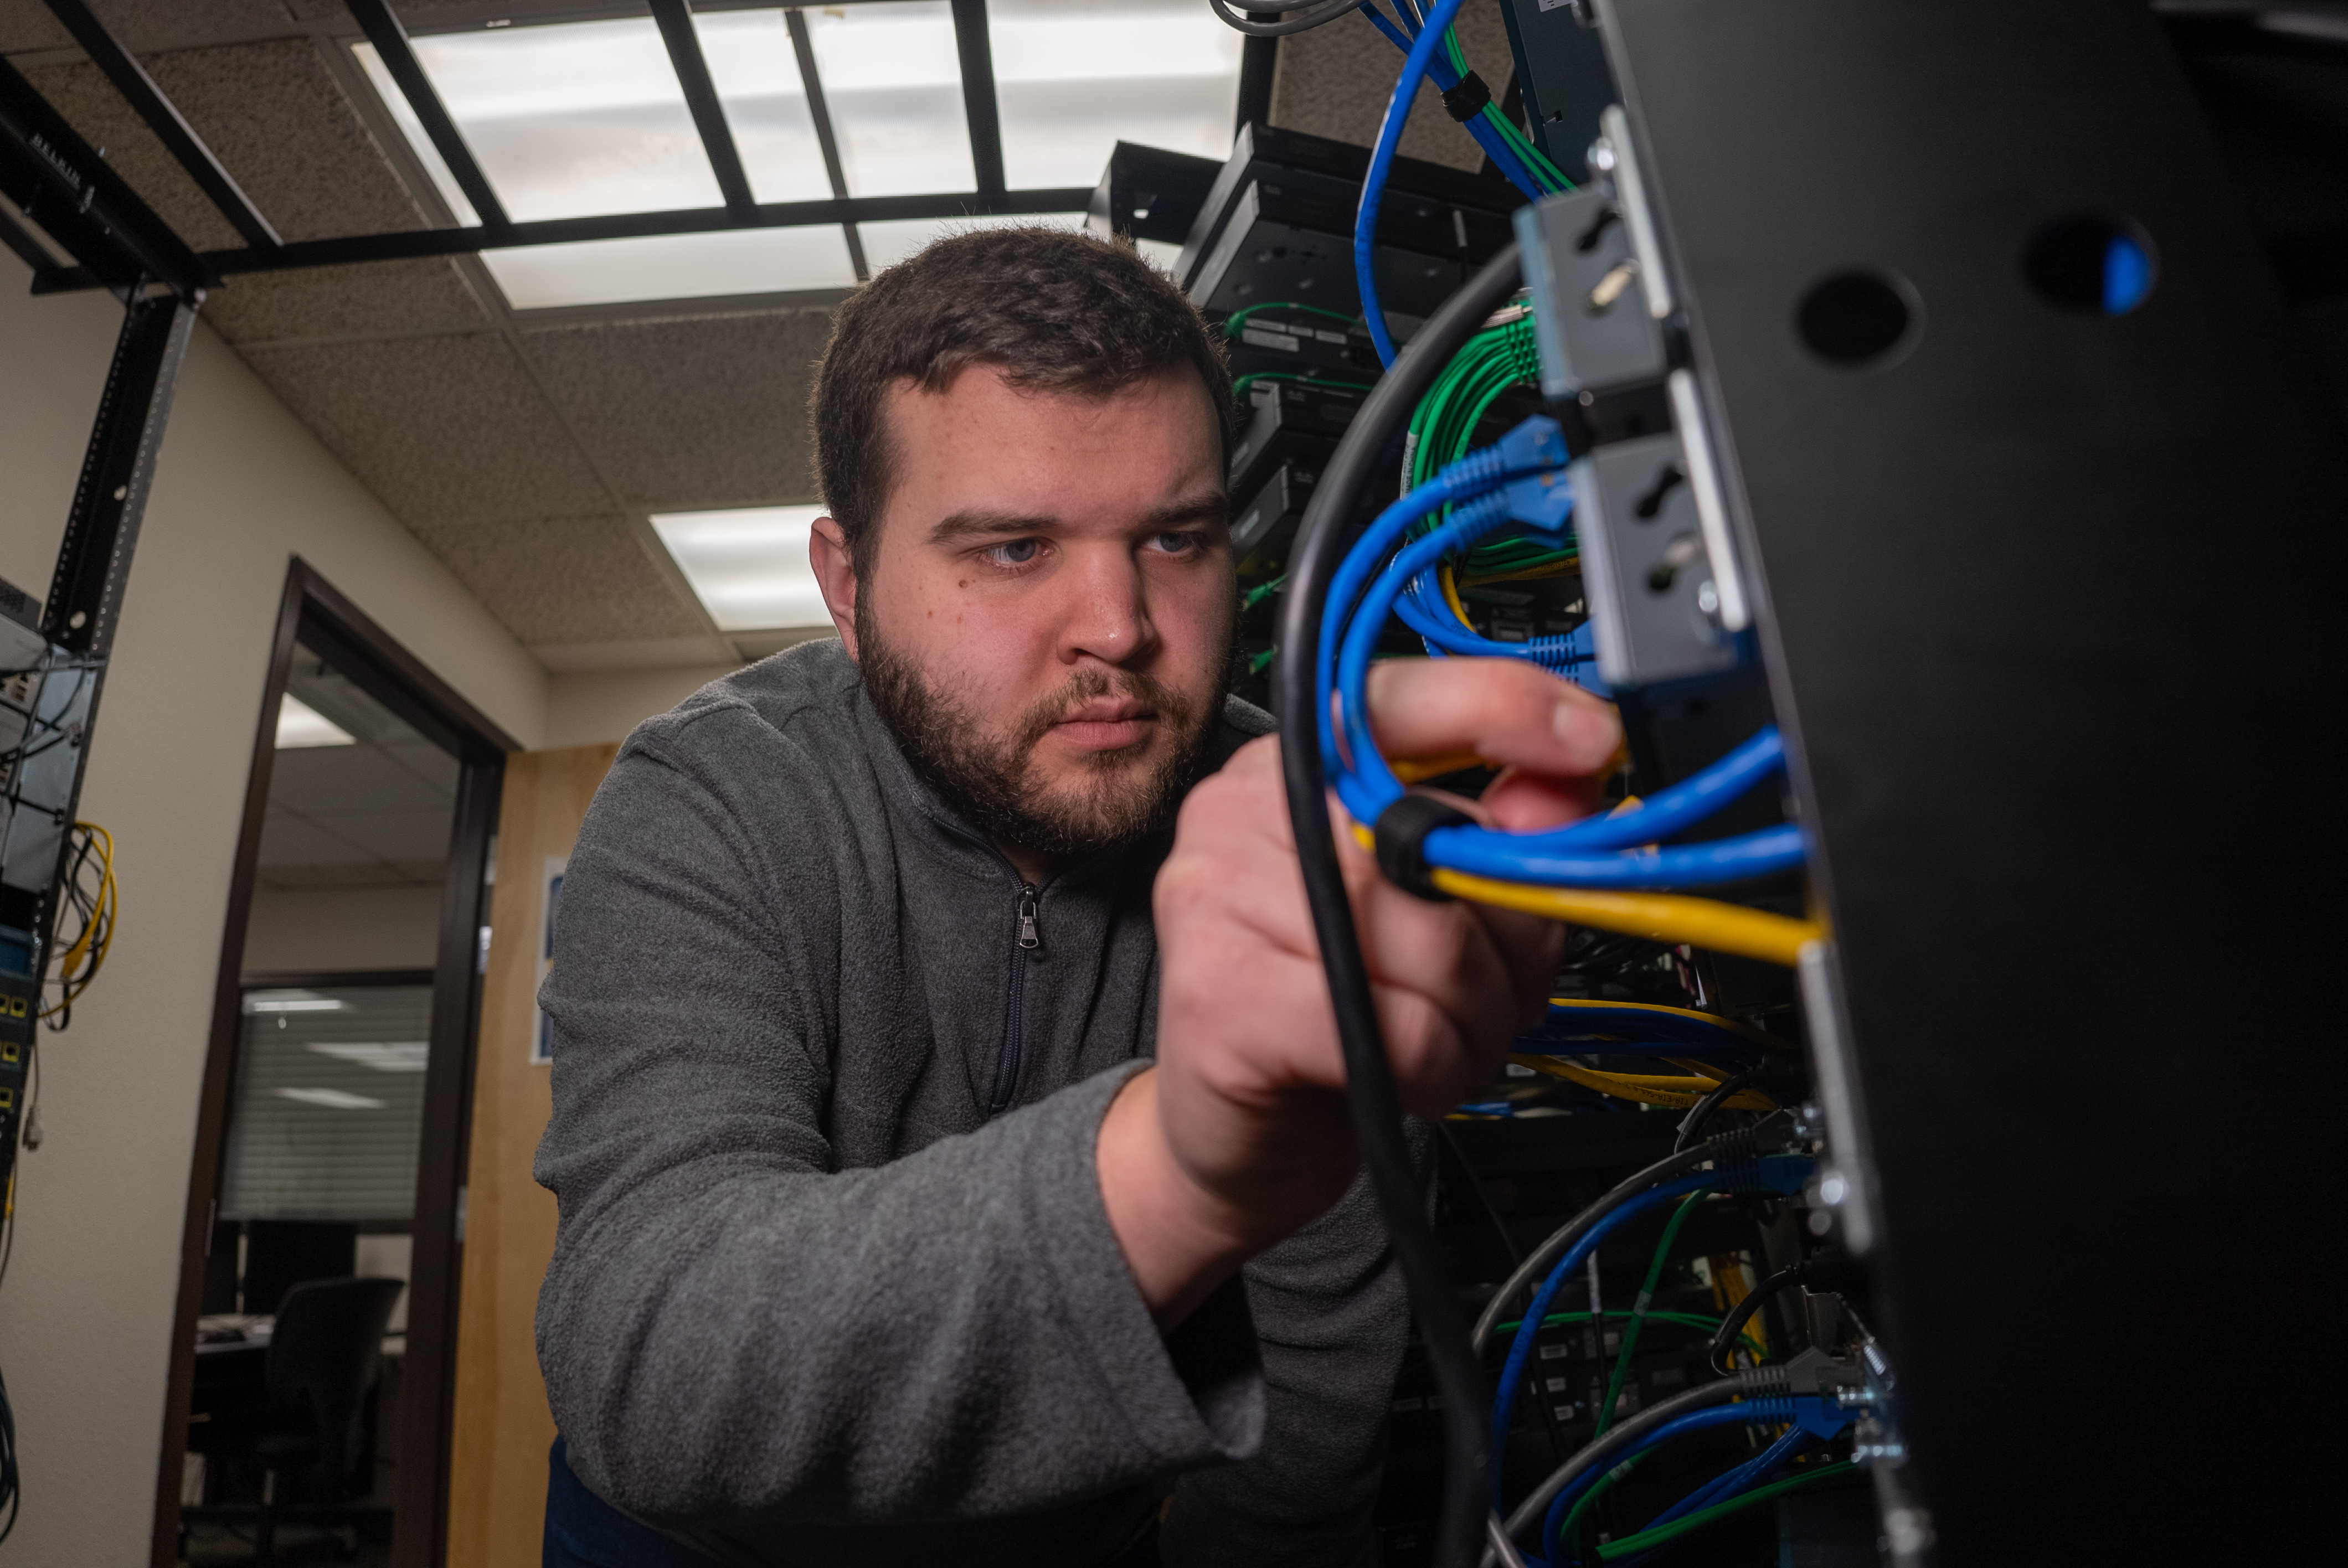 Student working on a mainframe computer